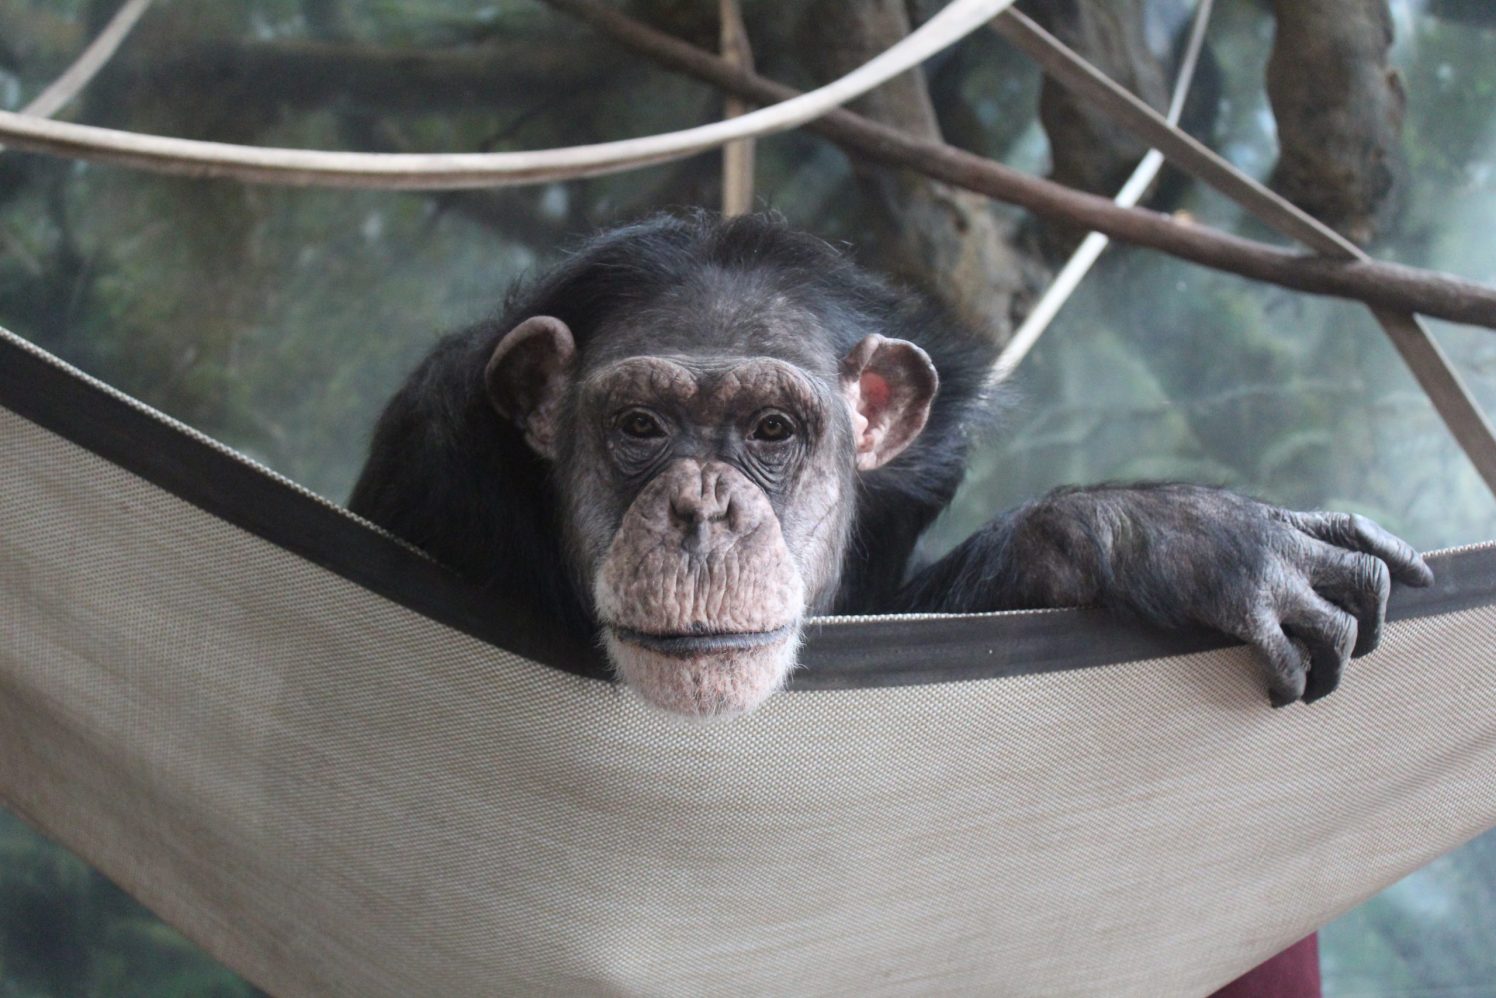 Lincoln Park Zoo Responds to CVS’ Promise to Stop Selling Problematic Greeting Cards Featuring Chimpanzees